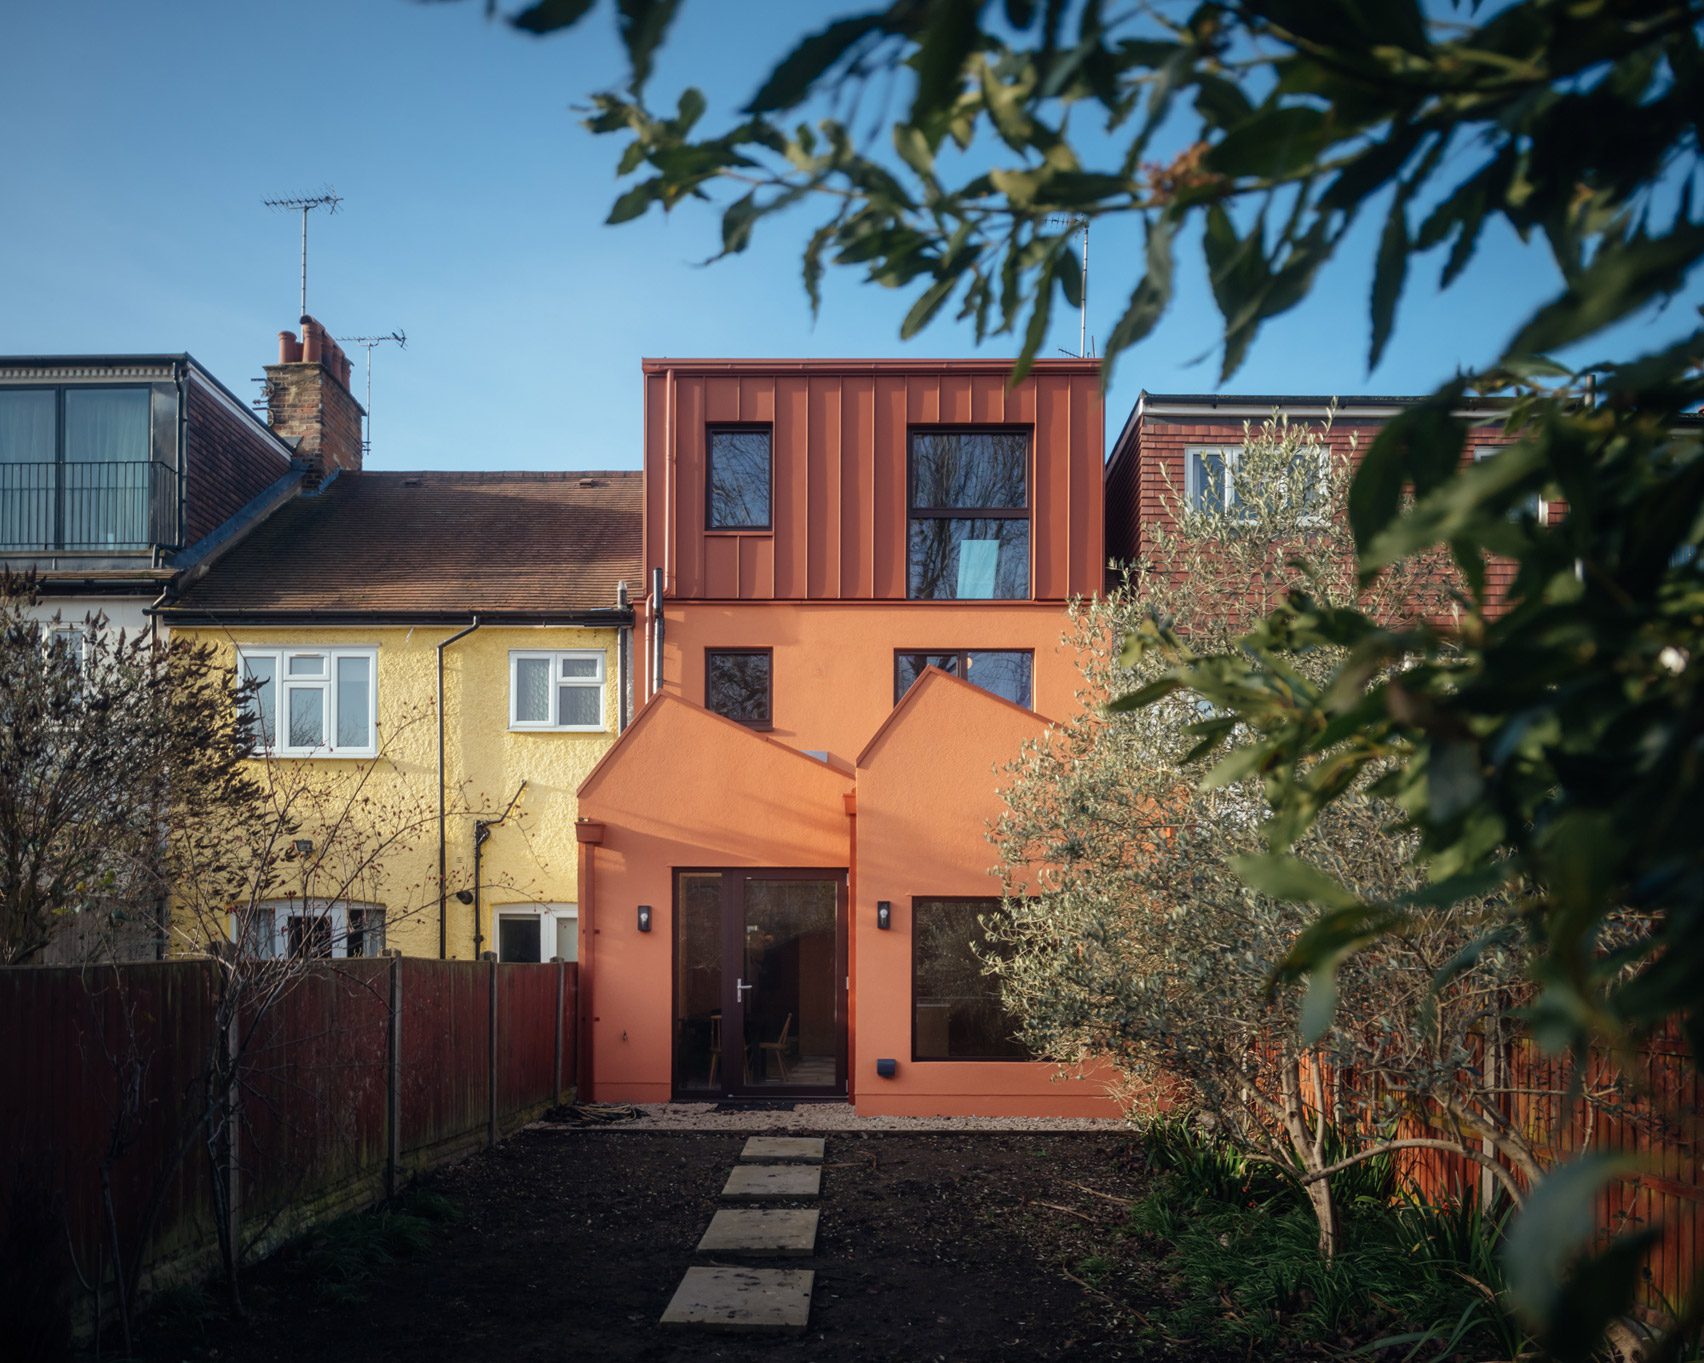 Rear elevation of Mid Terrace Dream by Collective Works